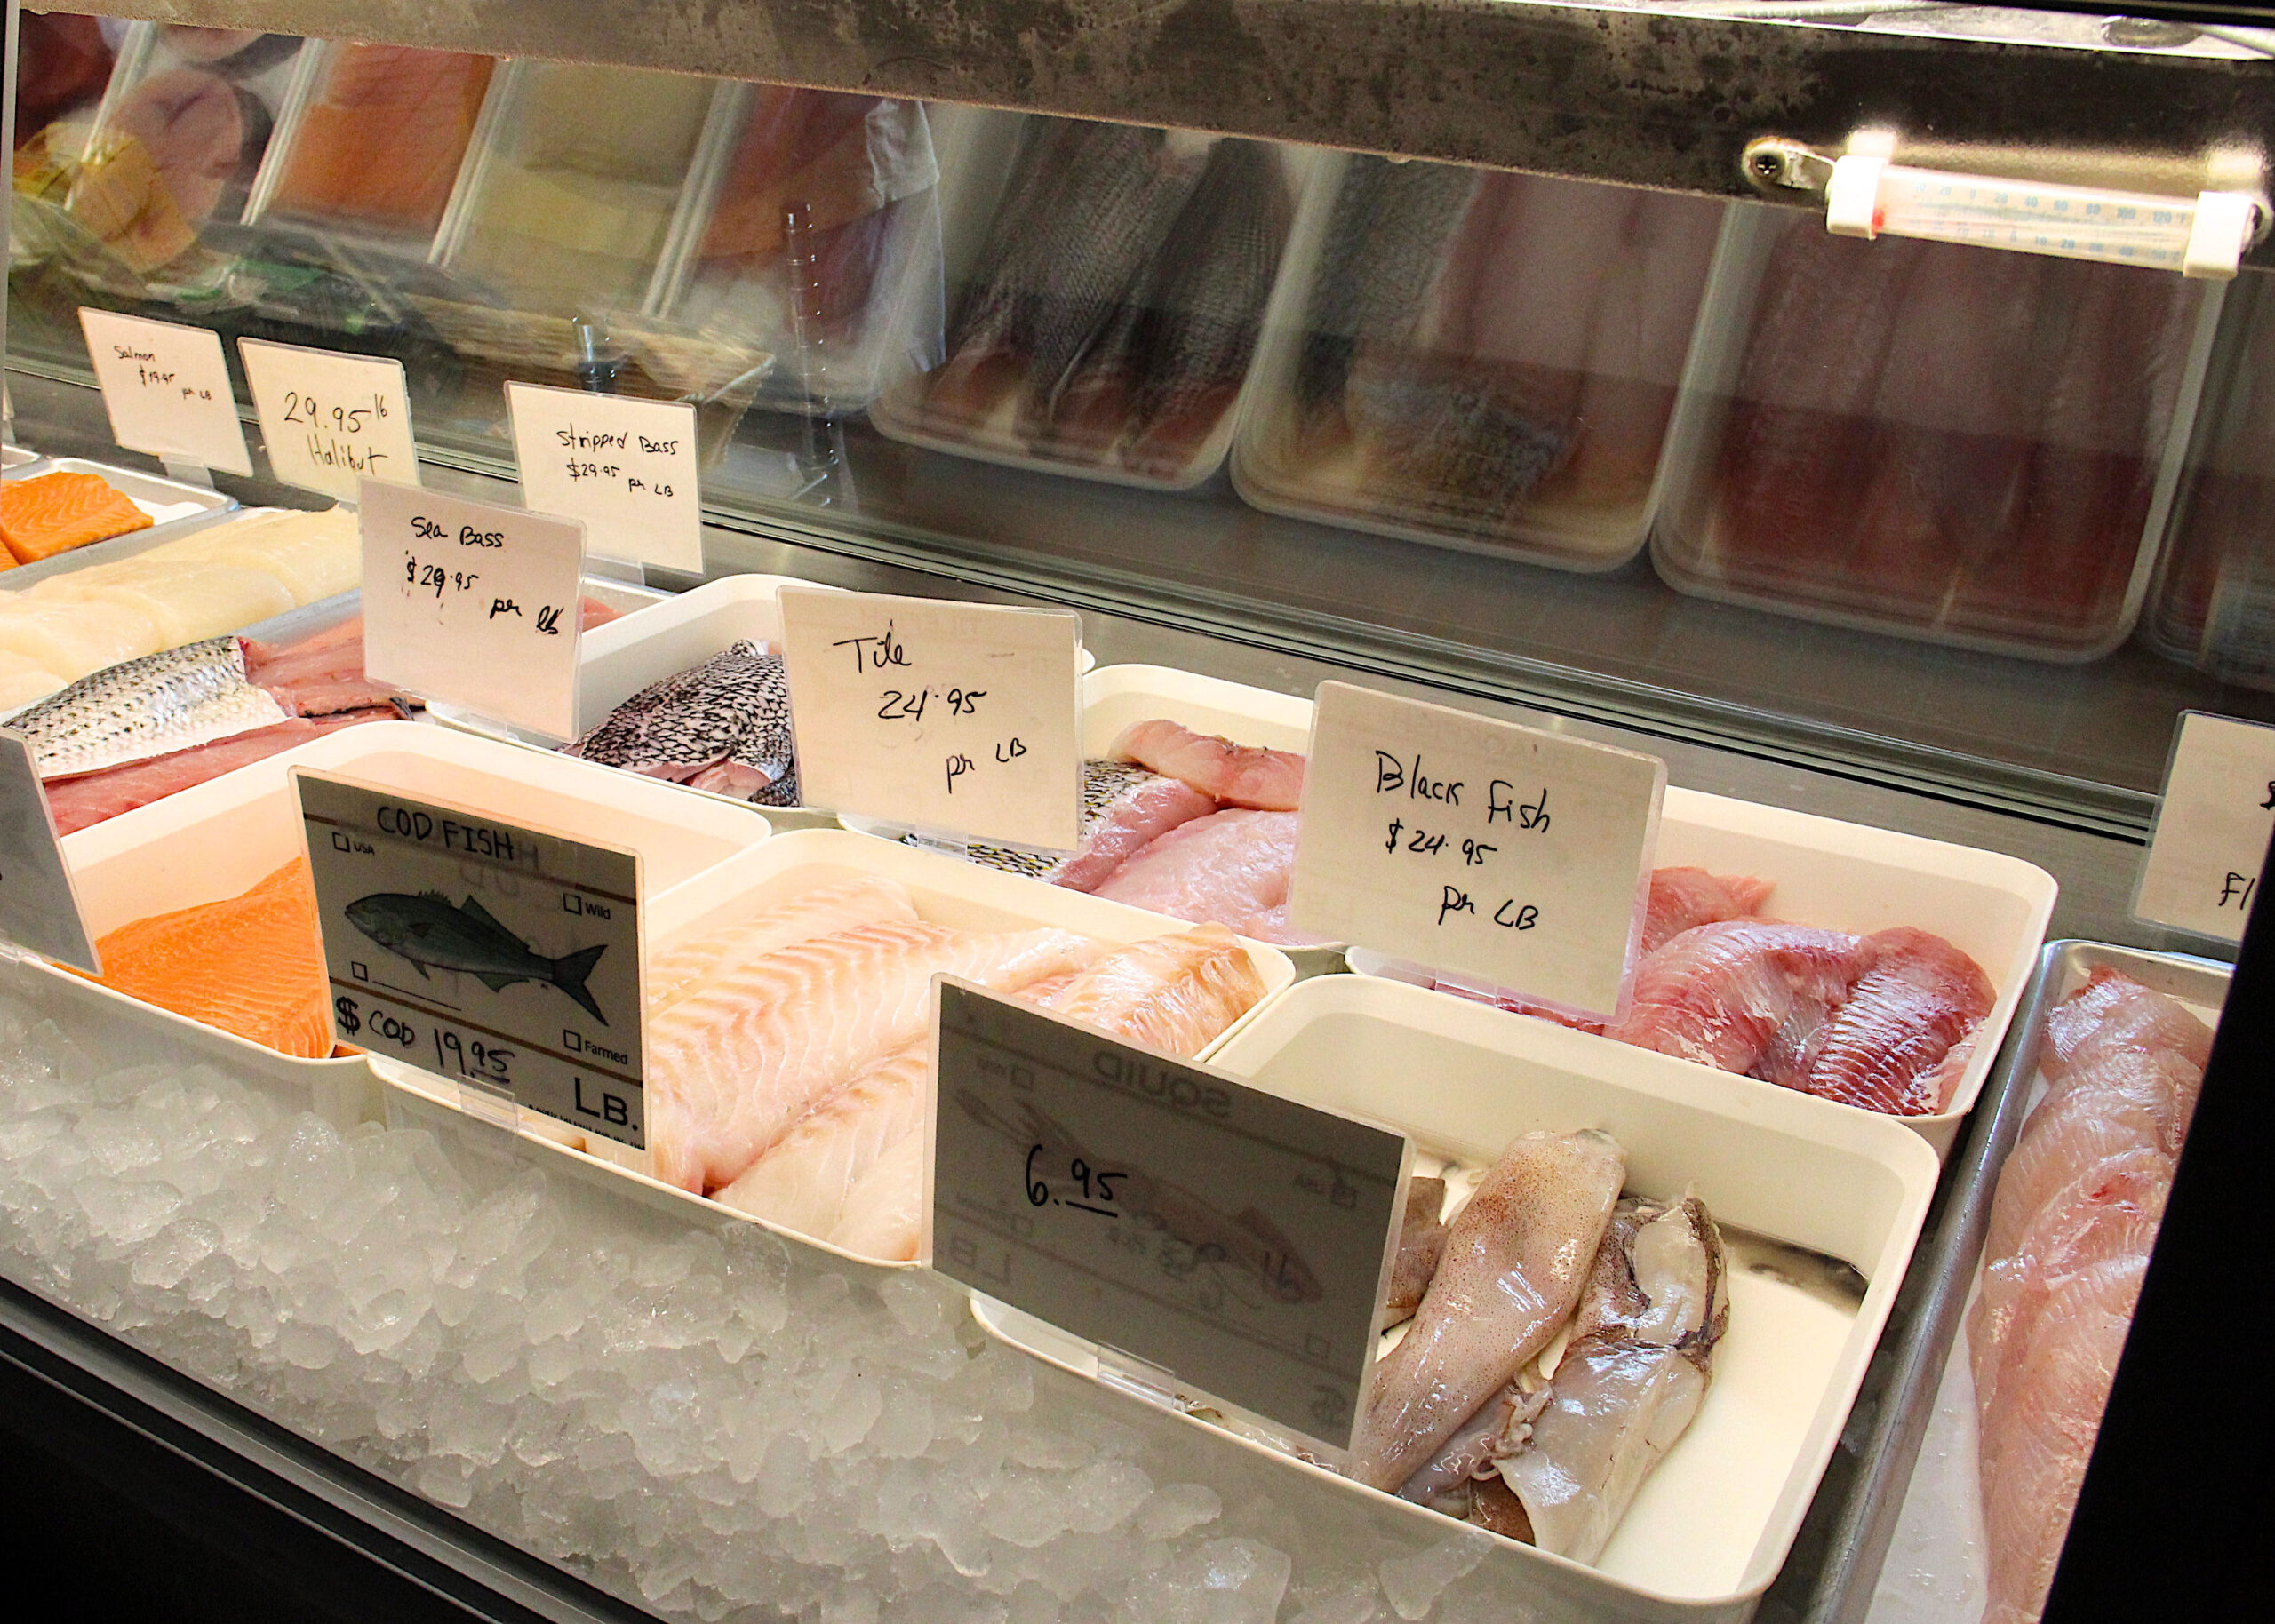 Fishmongers, Restaurants Grapple With Sourcing Seafood Sustainably